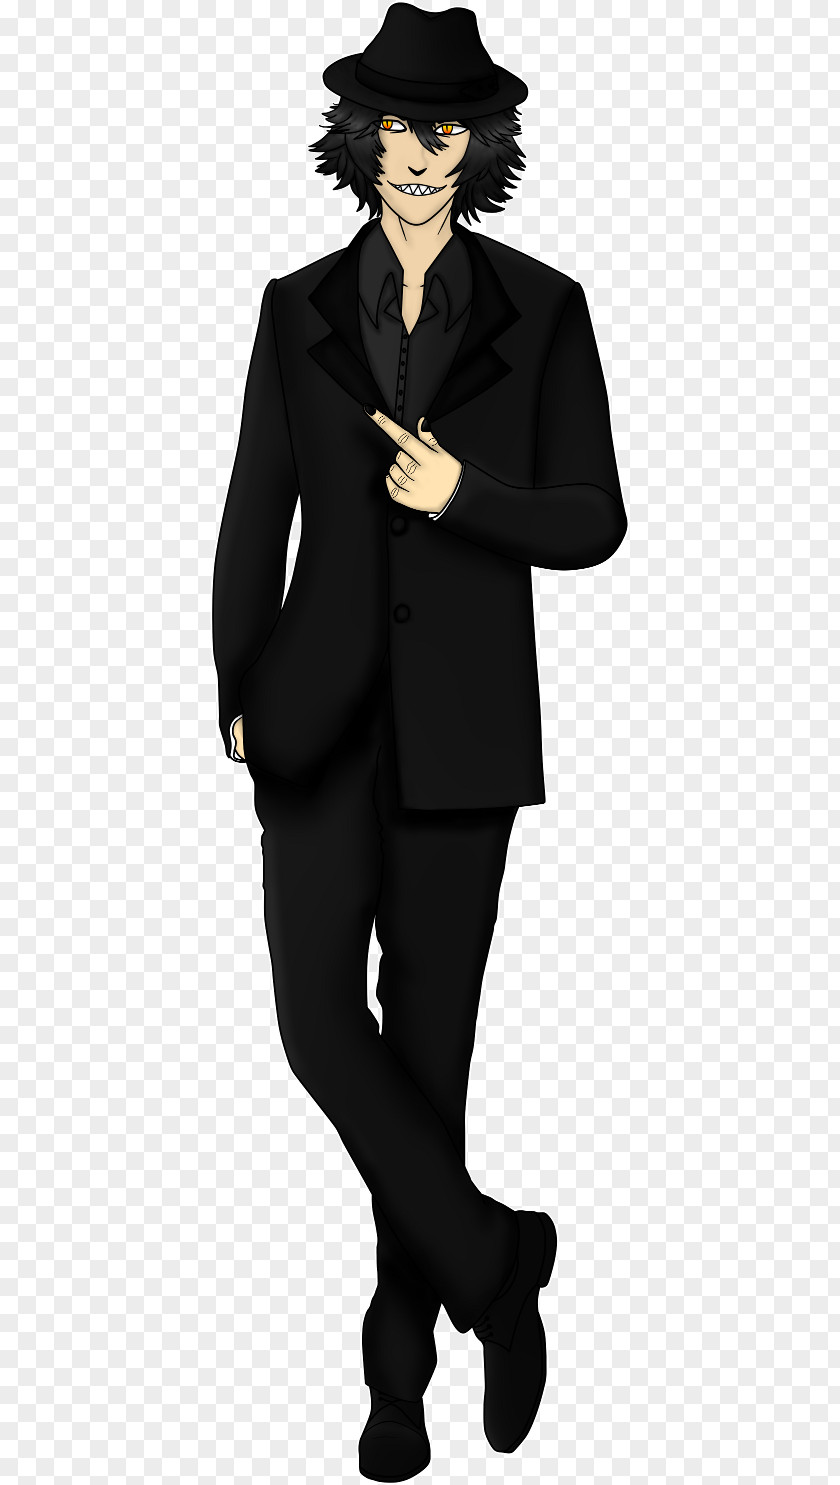 Giant Pacific Octopus Length Illustration Cartoon Tuxedo M. Character PNG